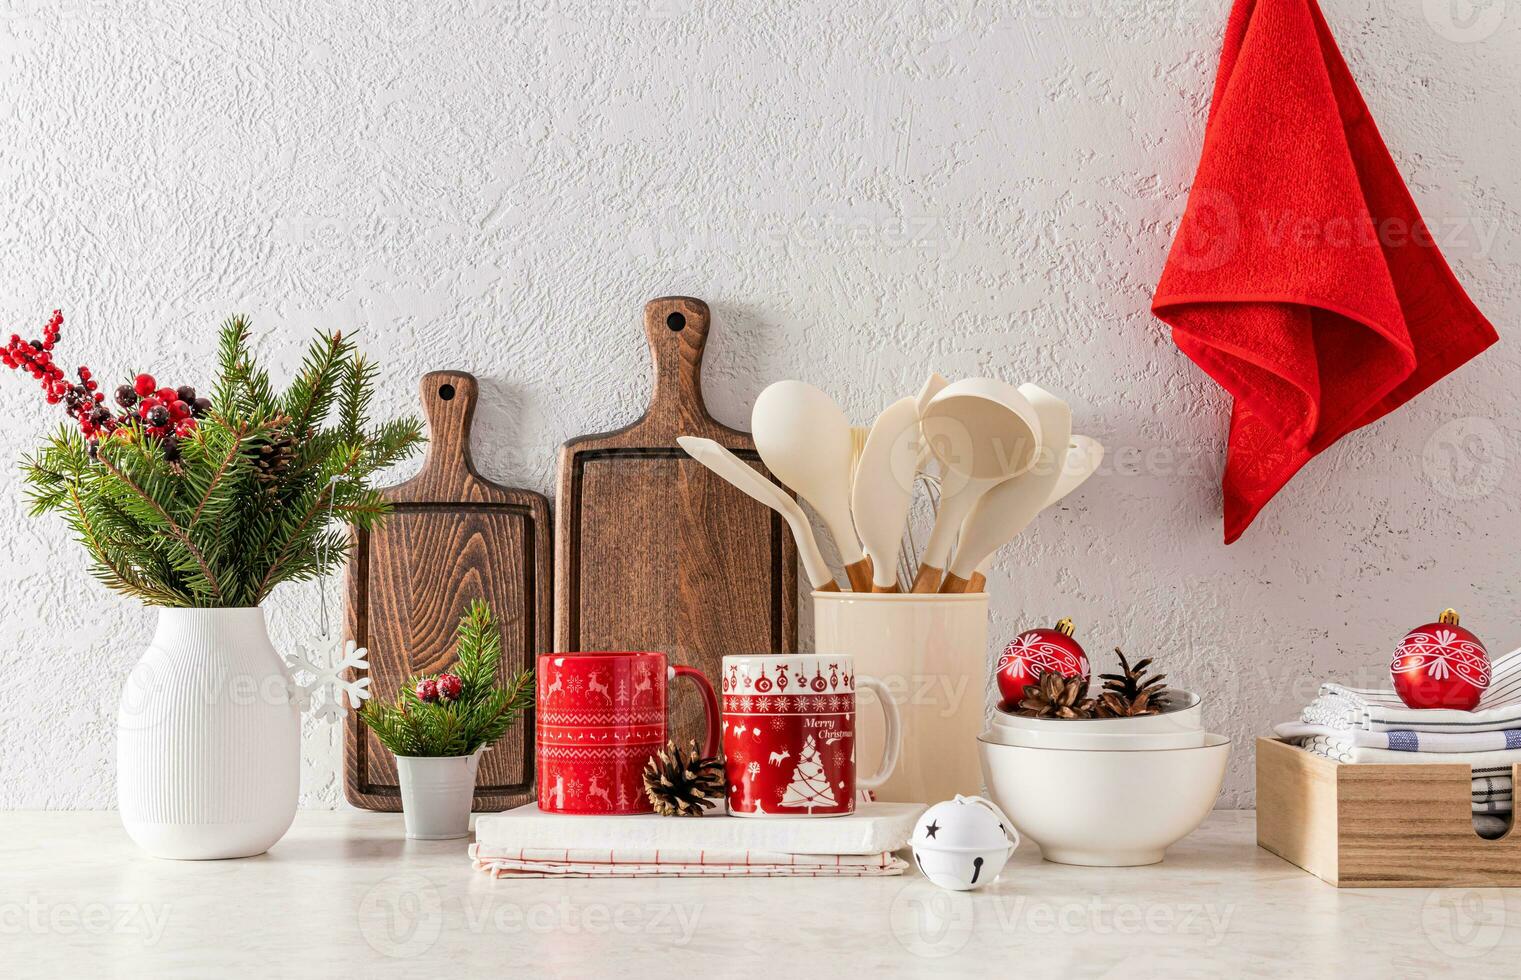 Kitchen utensils on a New Year's decorated countertop for the holiday with bright New Year's decor in traditional red and white tones. front look. photo